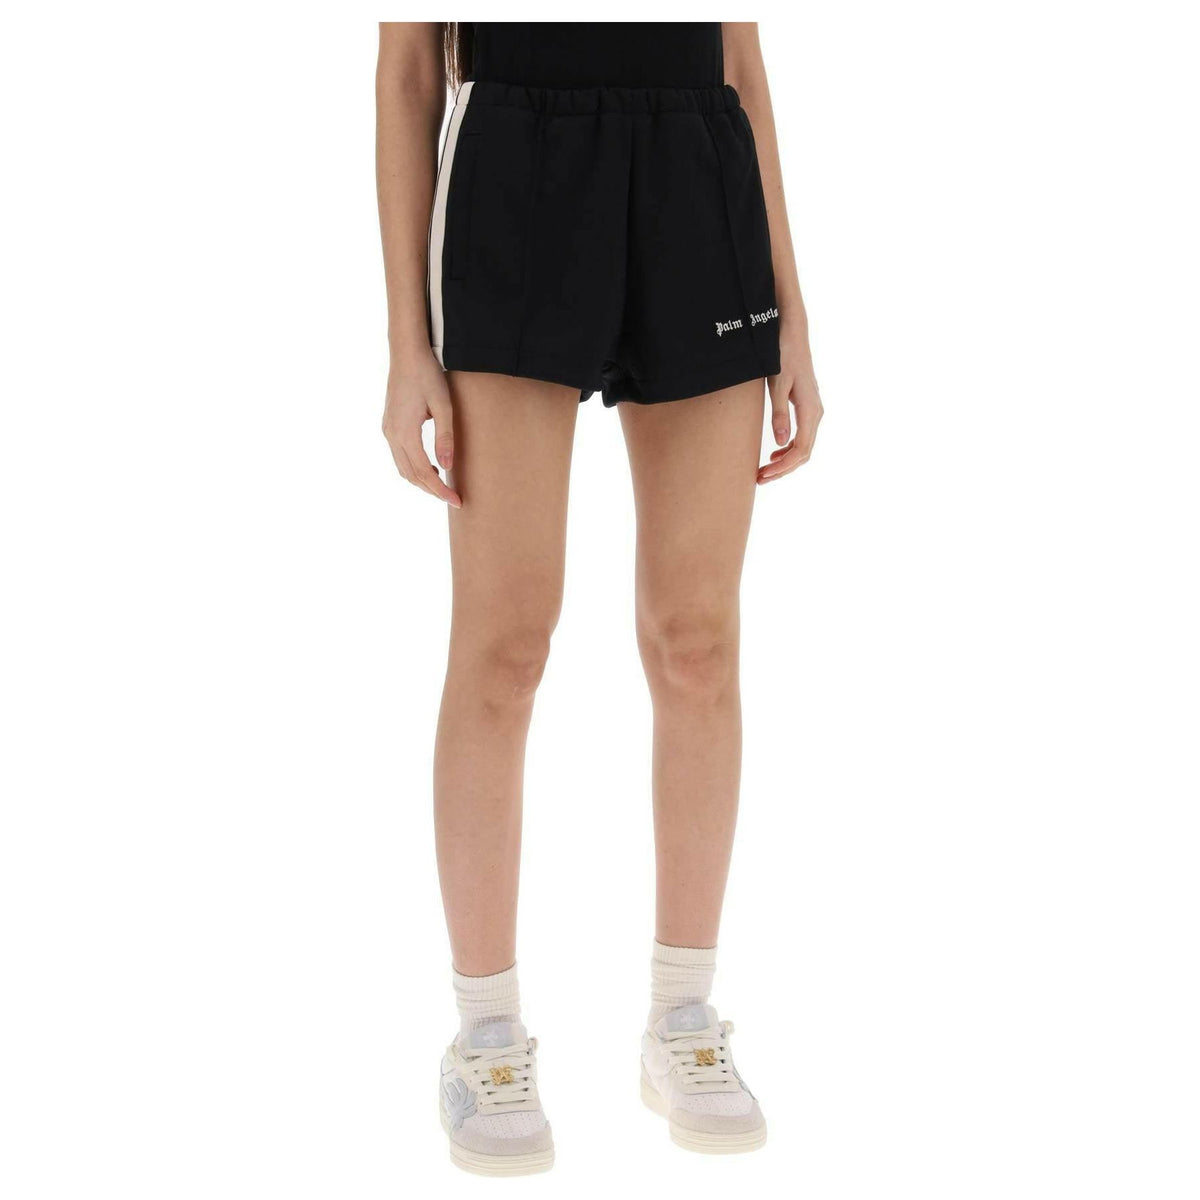 PALM ANGELS - Track Shorts With Contrast Bands - JOHN JULIA